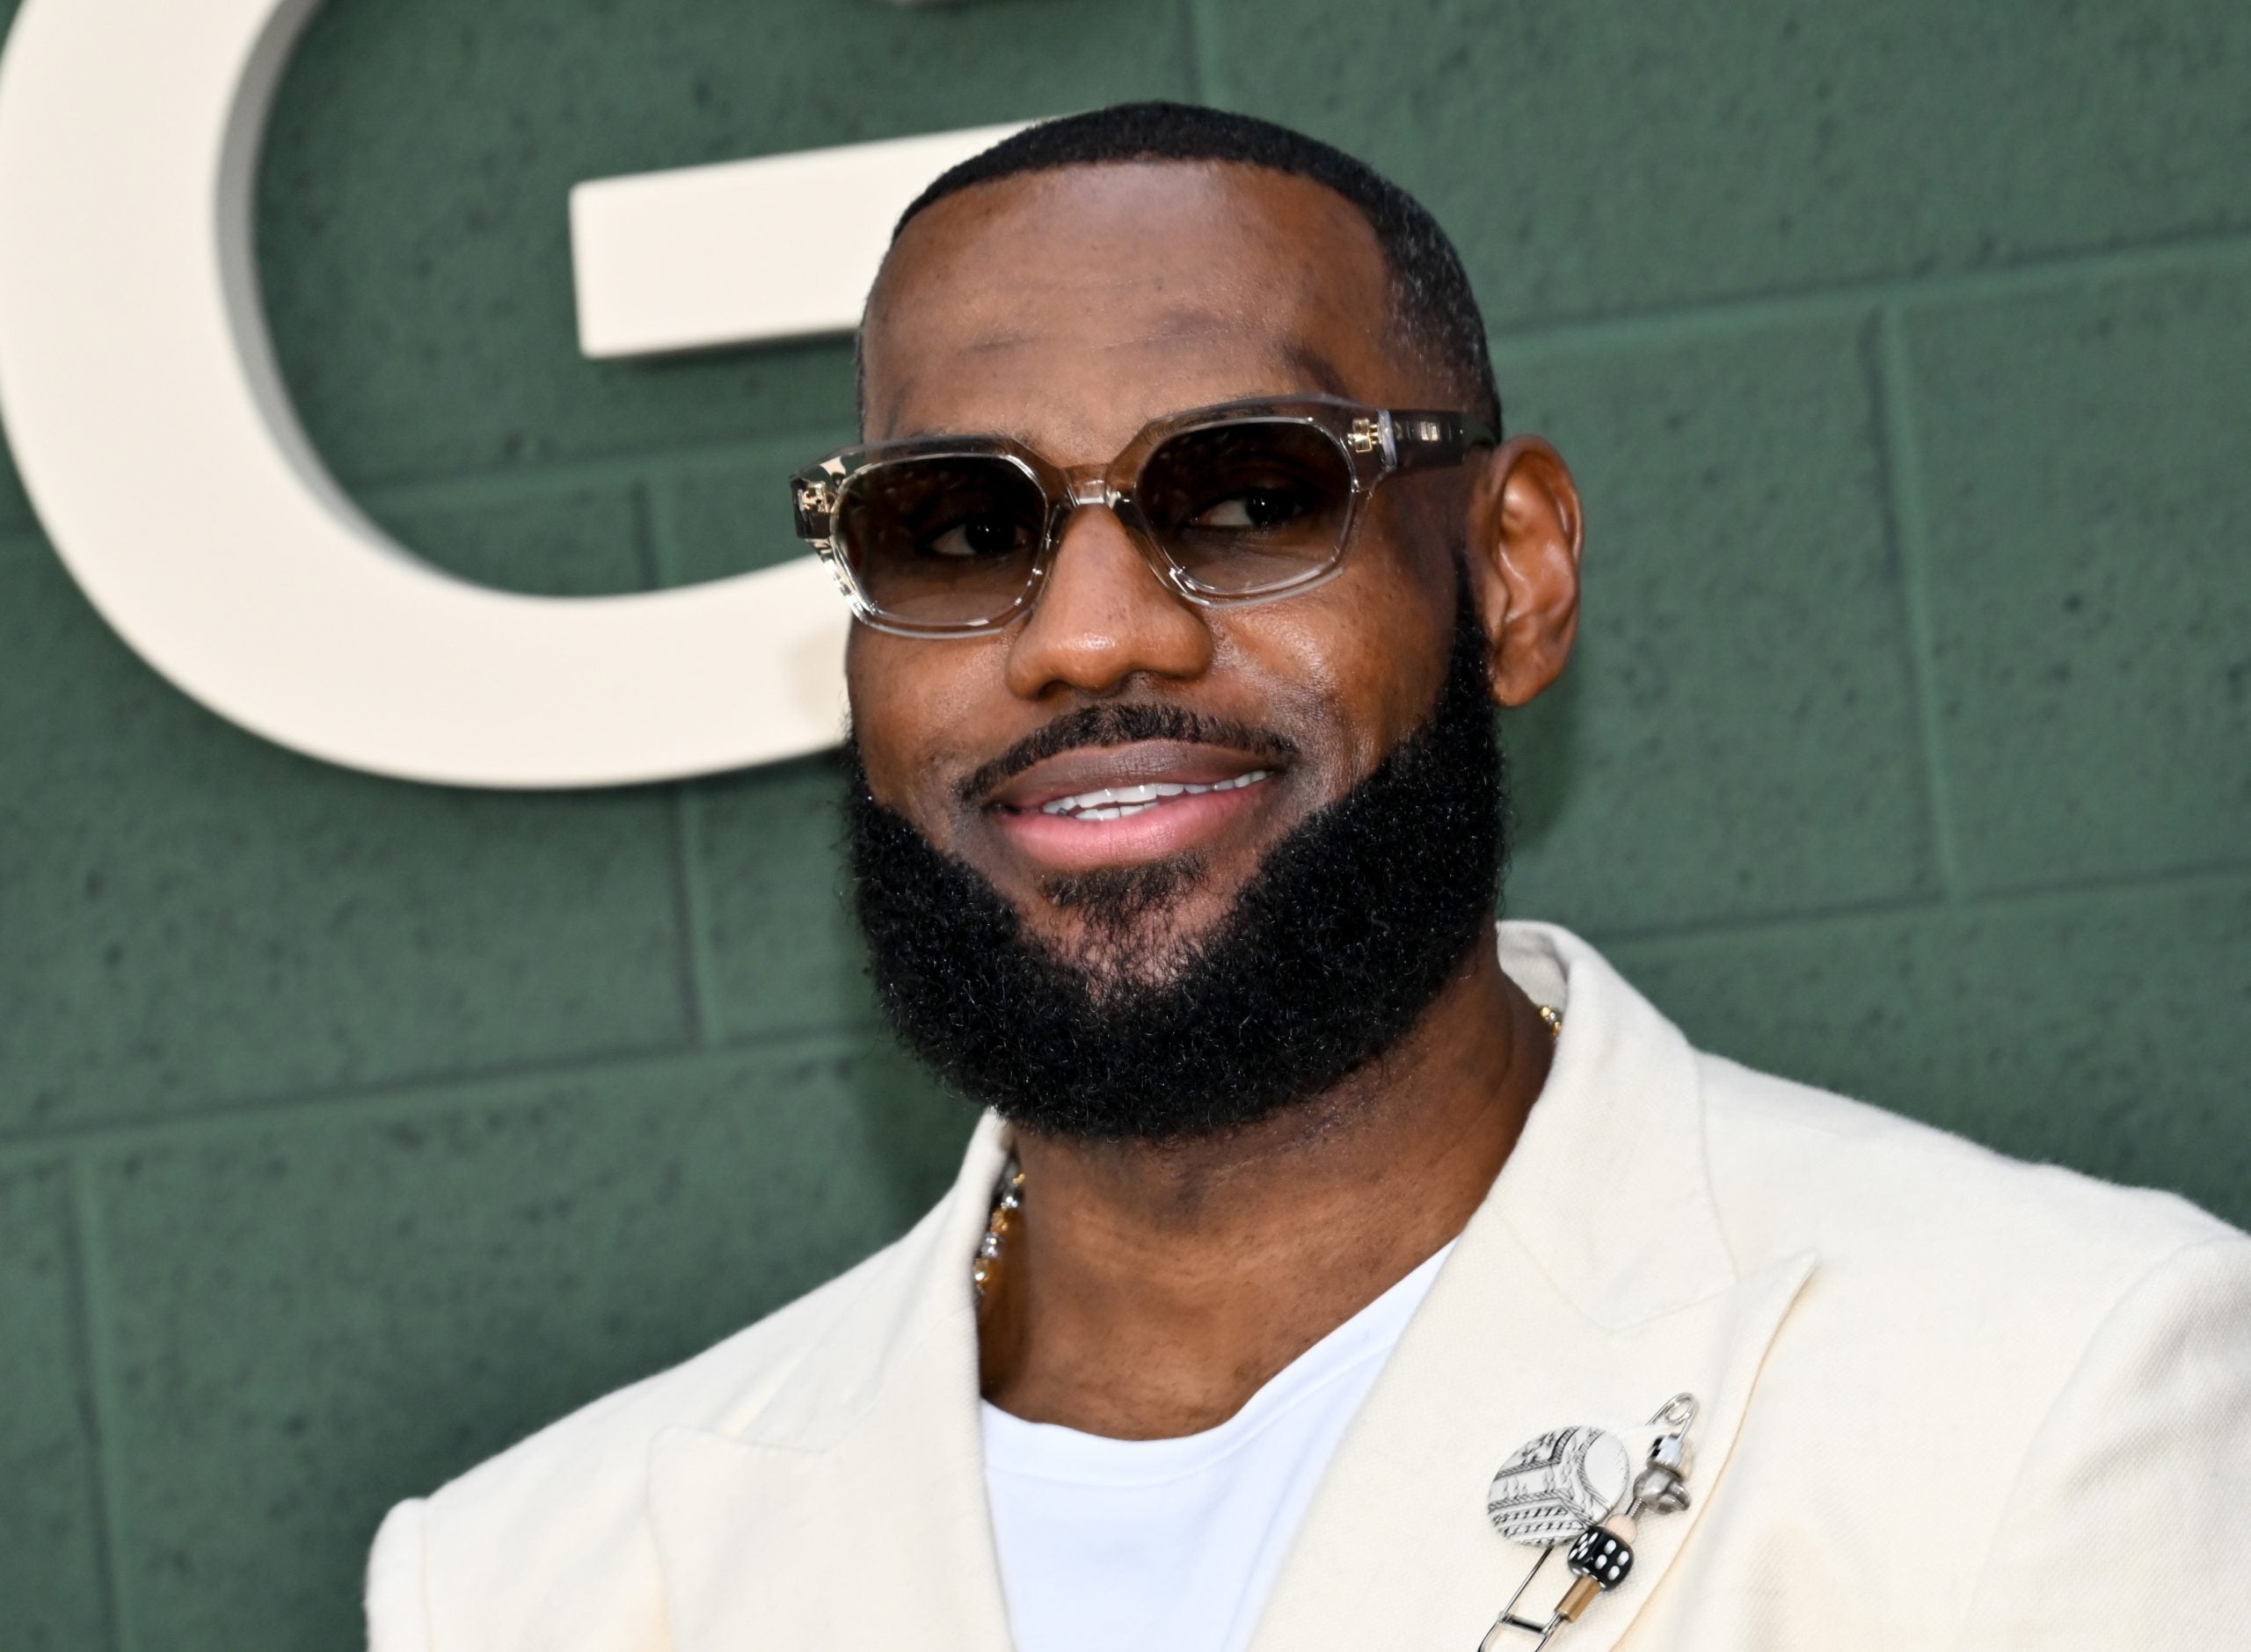 LeBron James Launches Affordable Housing Unit For Up To 50 Families